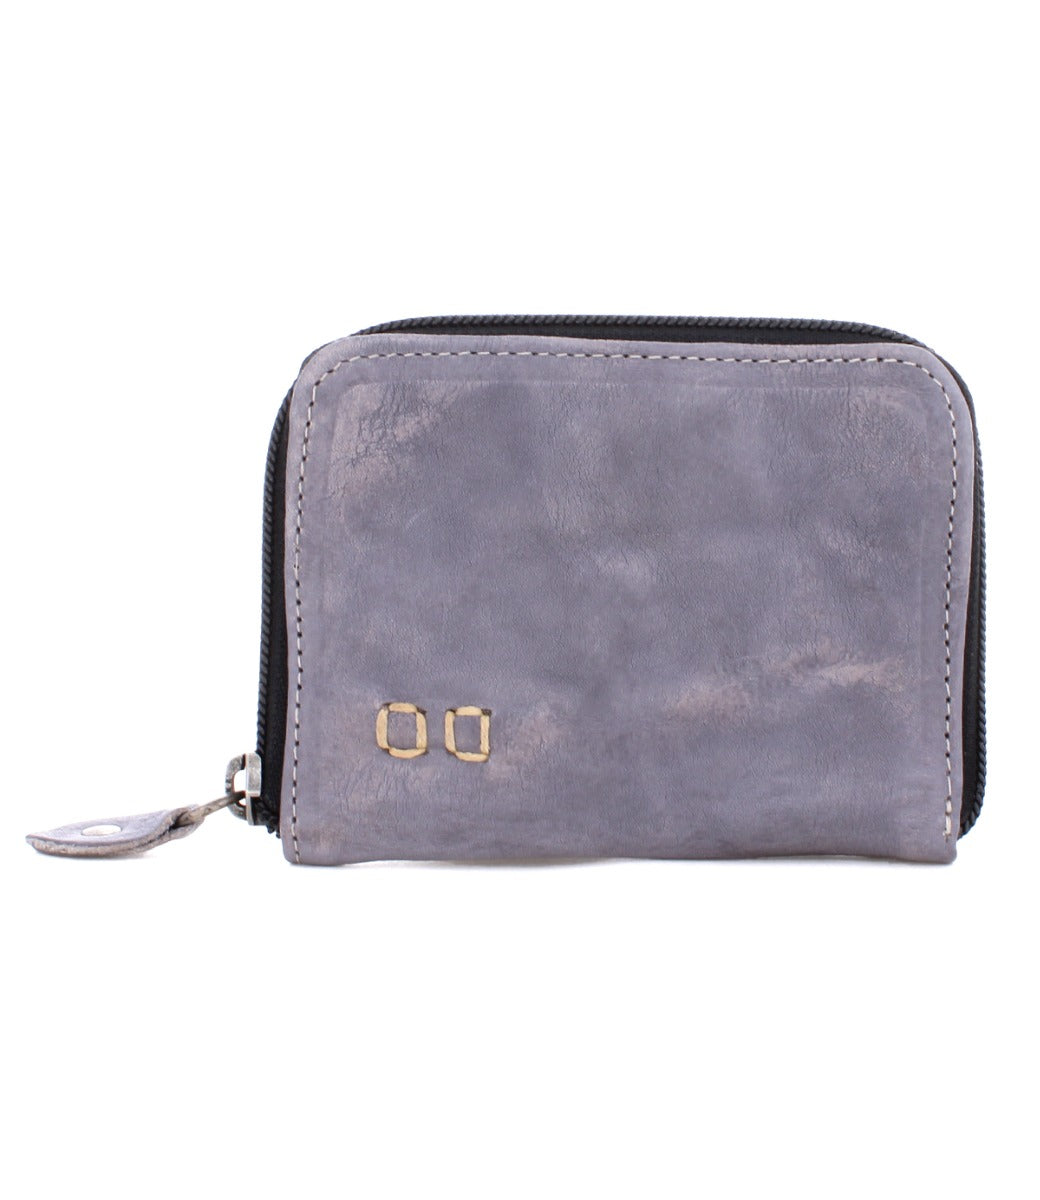 A Ozzie leather wallet with the letter d on it from Bed Stu.